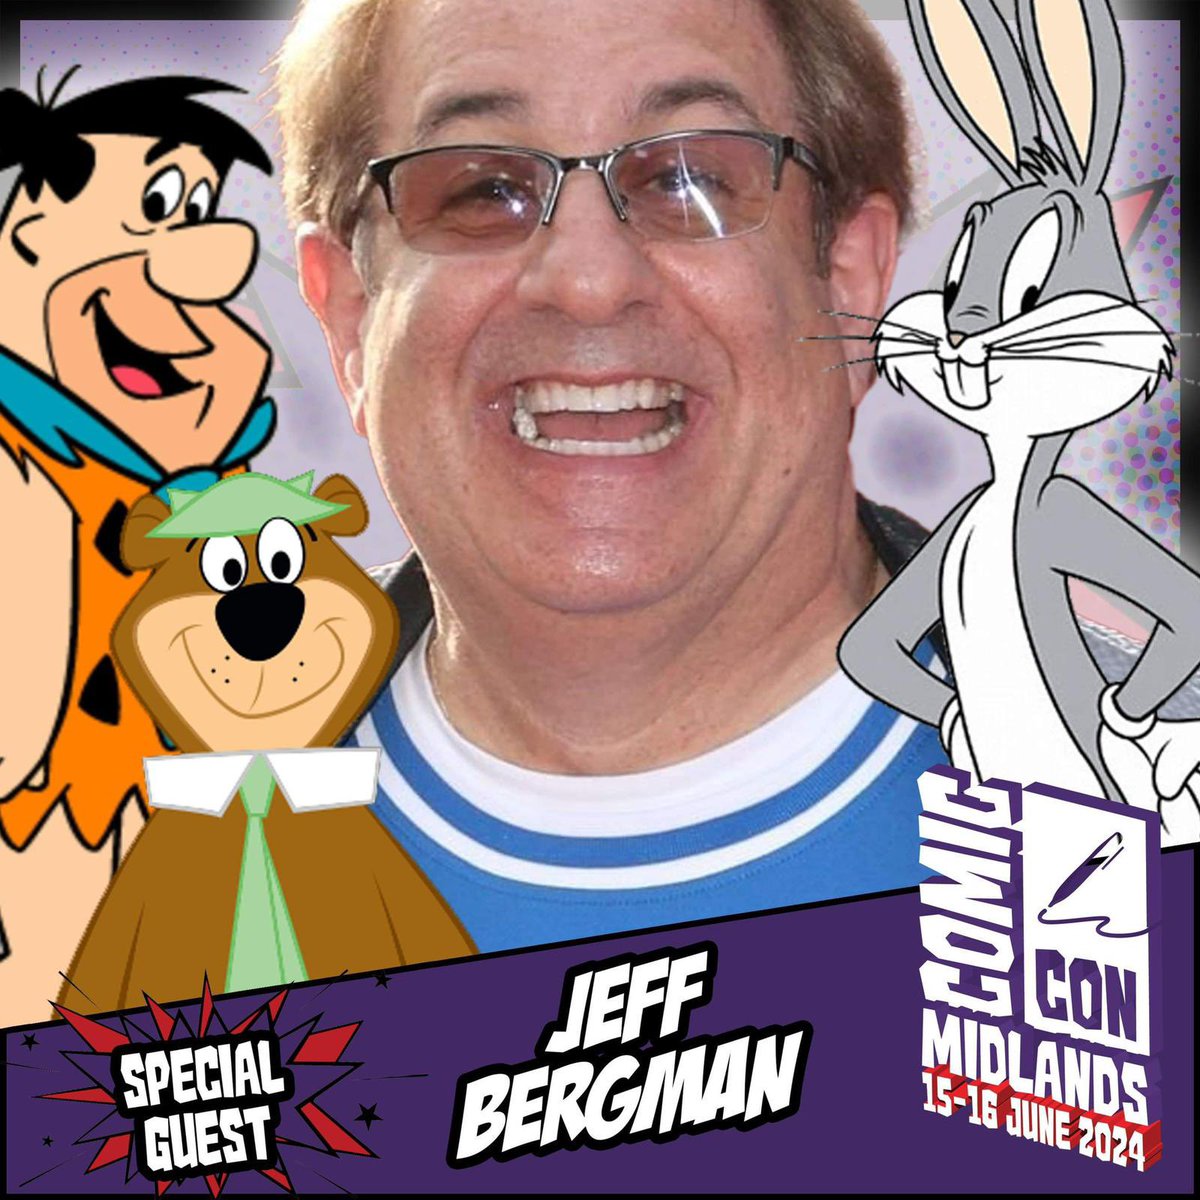 Comic Con Midlands welcomes Jeff Bergman, known for projects such as Loony Tunes, The Flintstones, Yogi Bear, and many more. Appearing 15-16 June! Tickets: comicconventionmidlands.co.uk